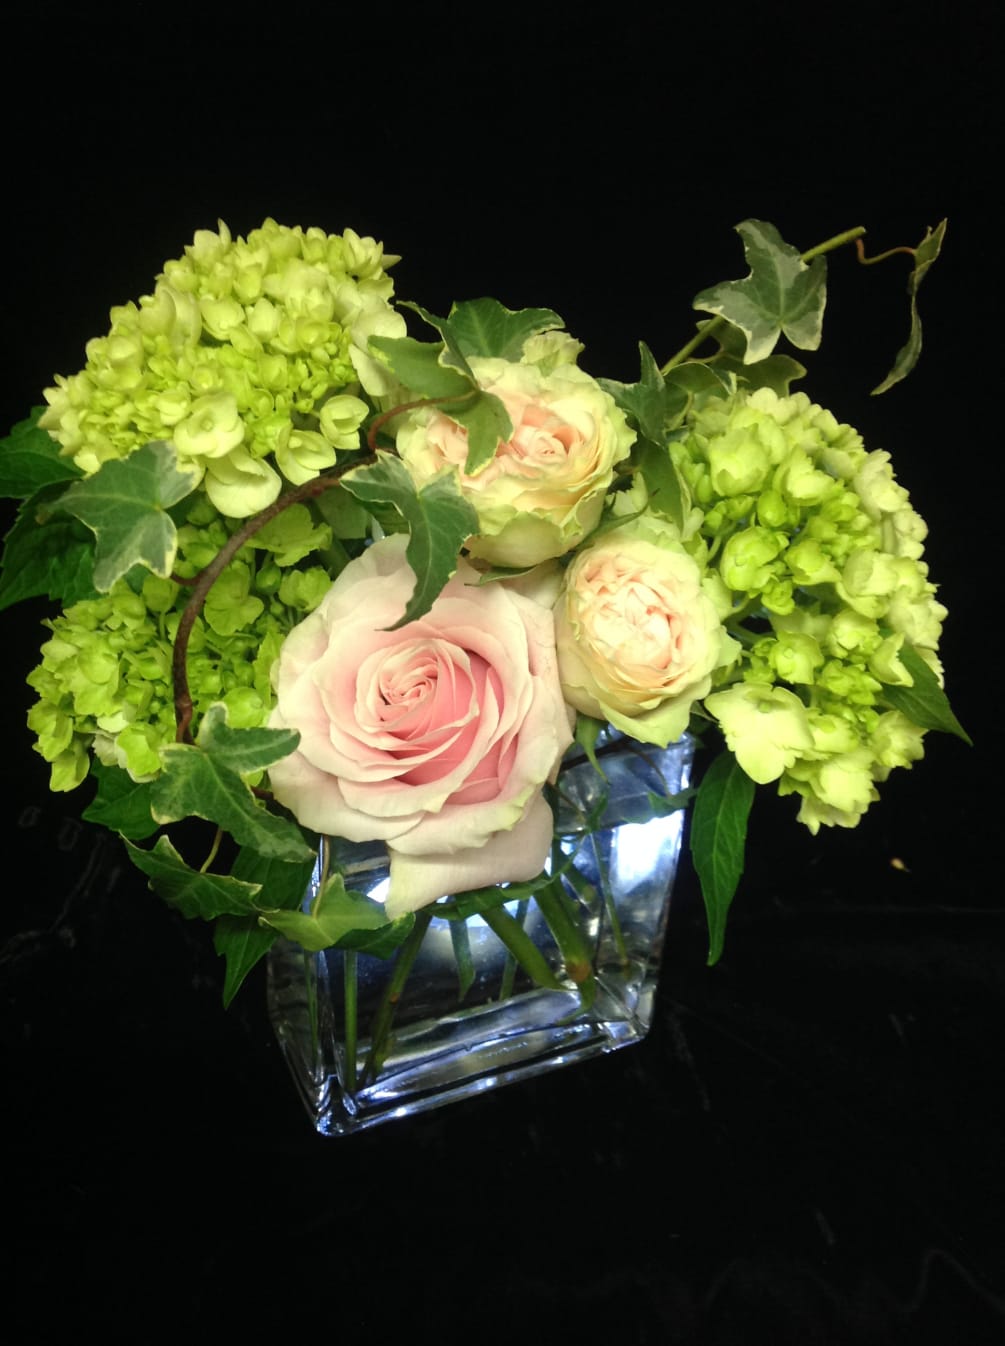 Sweet, Stylish breathy pink roses complimented with bright green hydrangea.